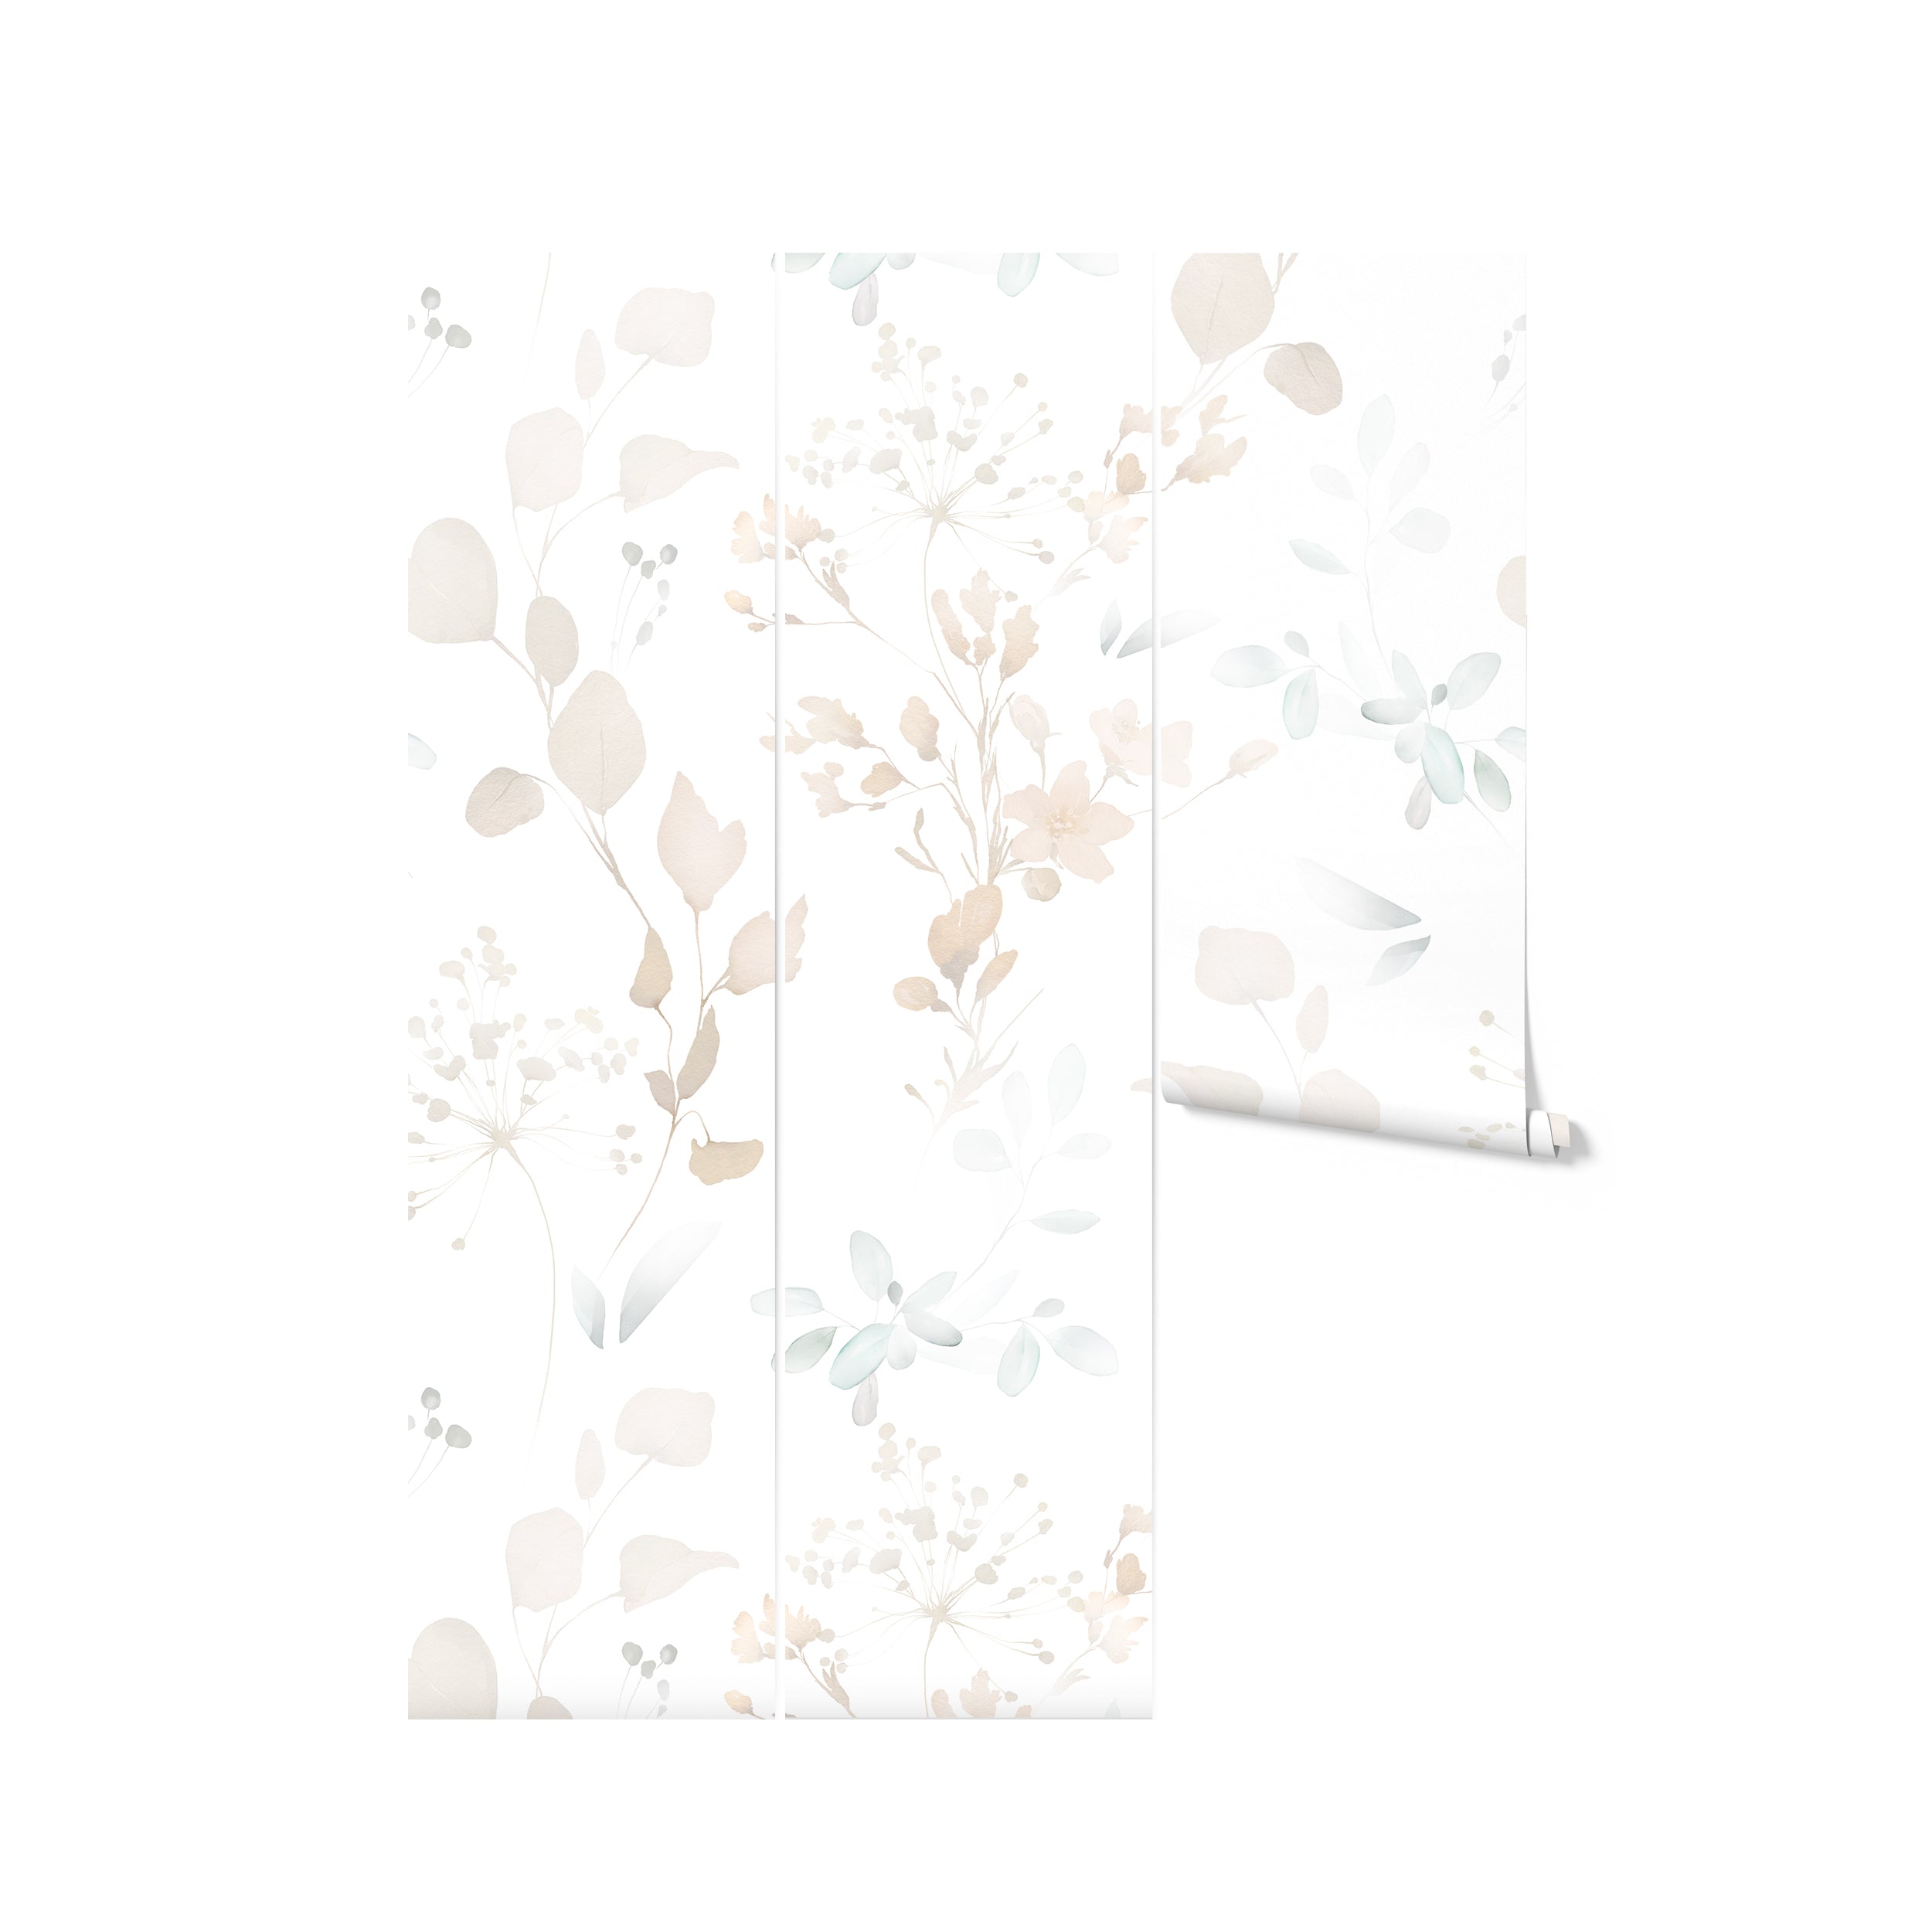 Three vertical panels displaying the Watercolour Floral & Herb Wallpaper. Each panel shows the continuous and harmonious pattern of floral and herbal illustrations, maintaining a cohesive and gentle flow across the sections. This setup showcases the wallpaper's potential to create a soothing and picturesque environment in any room.